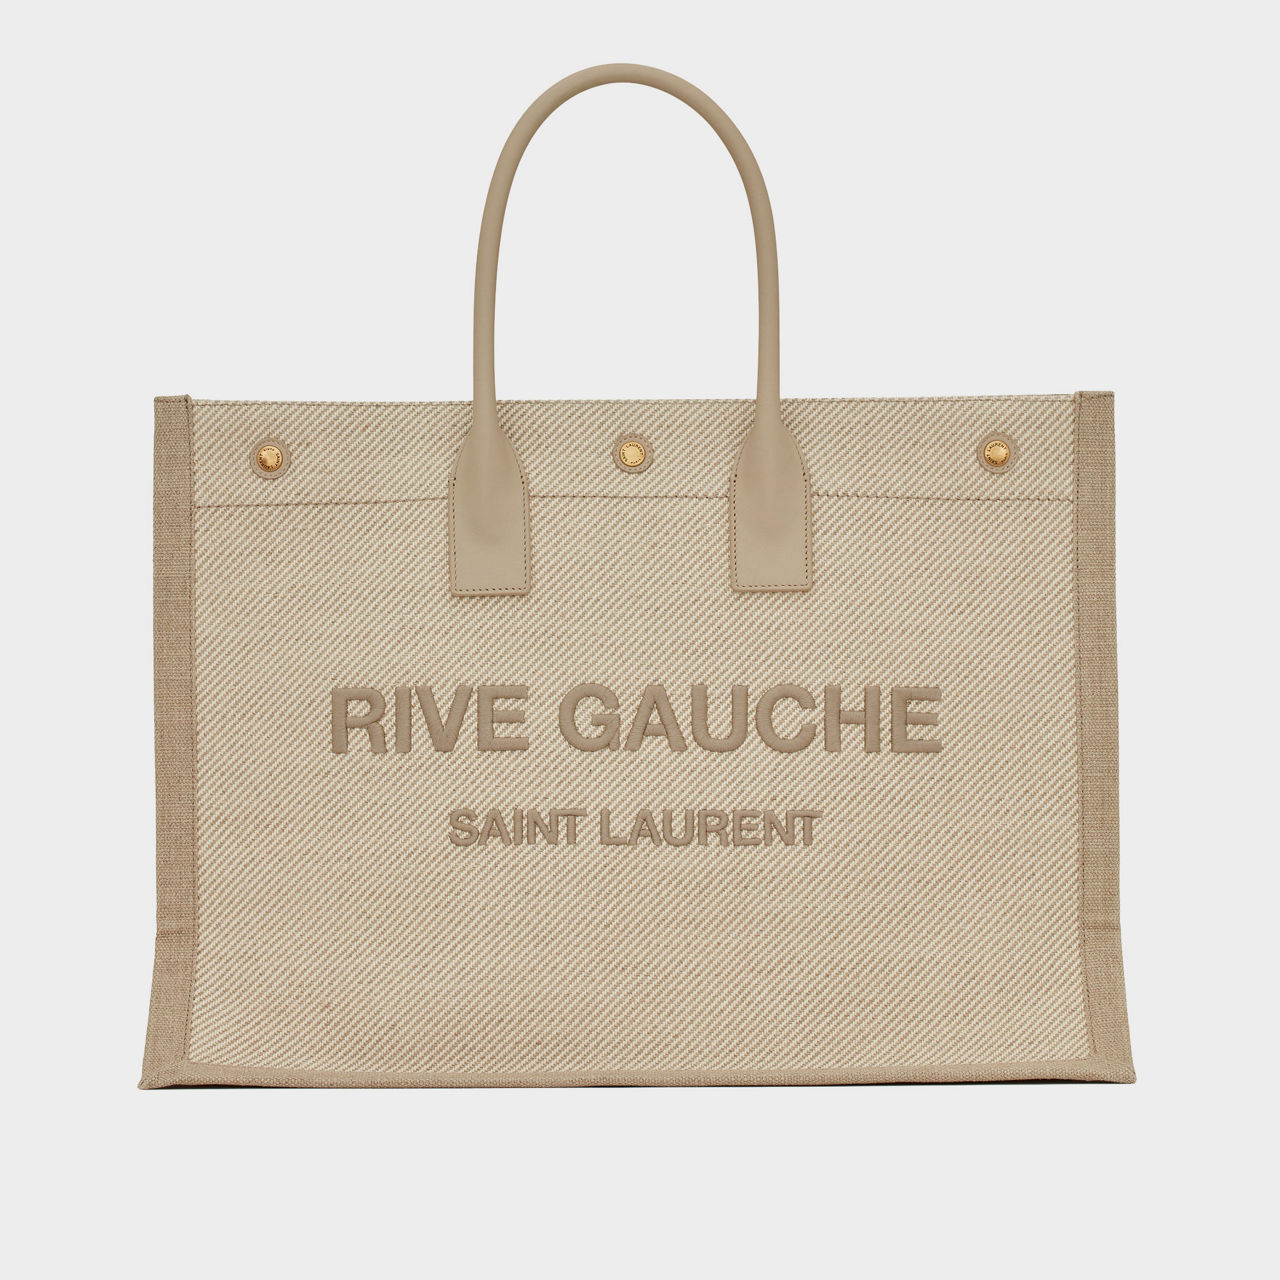 Rive Gauche small tote bag in smooth leather, Saint Laurent